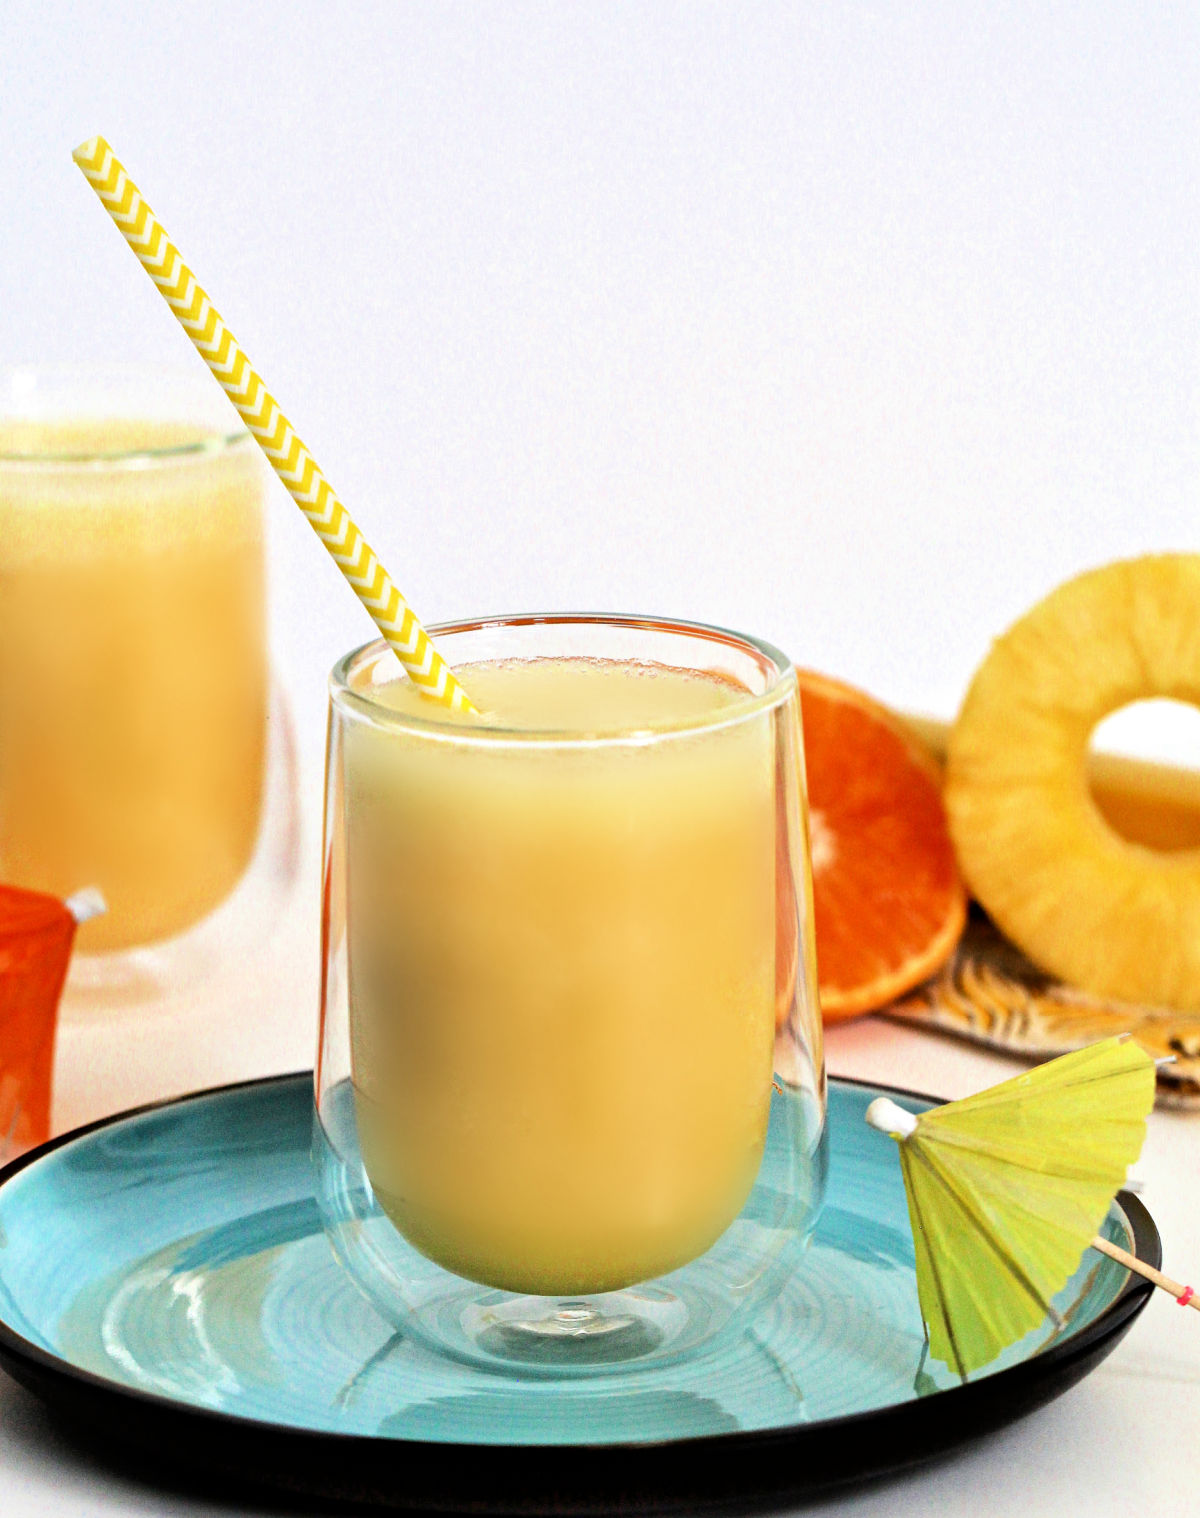 Smoothie in a glass with a yellow straw.